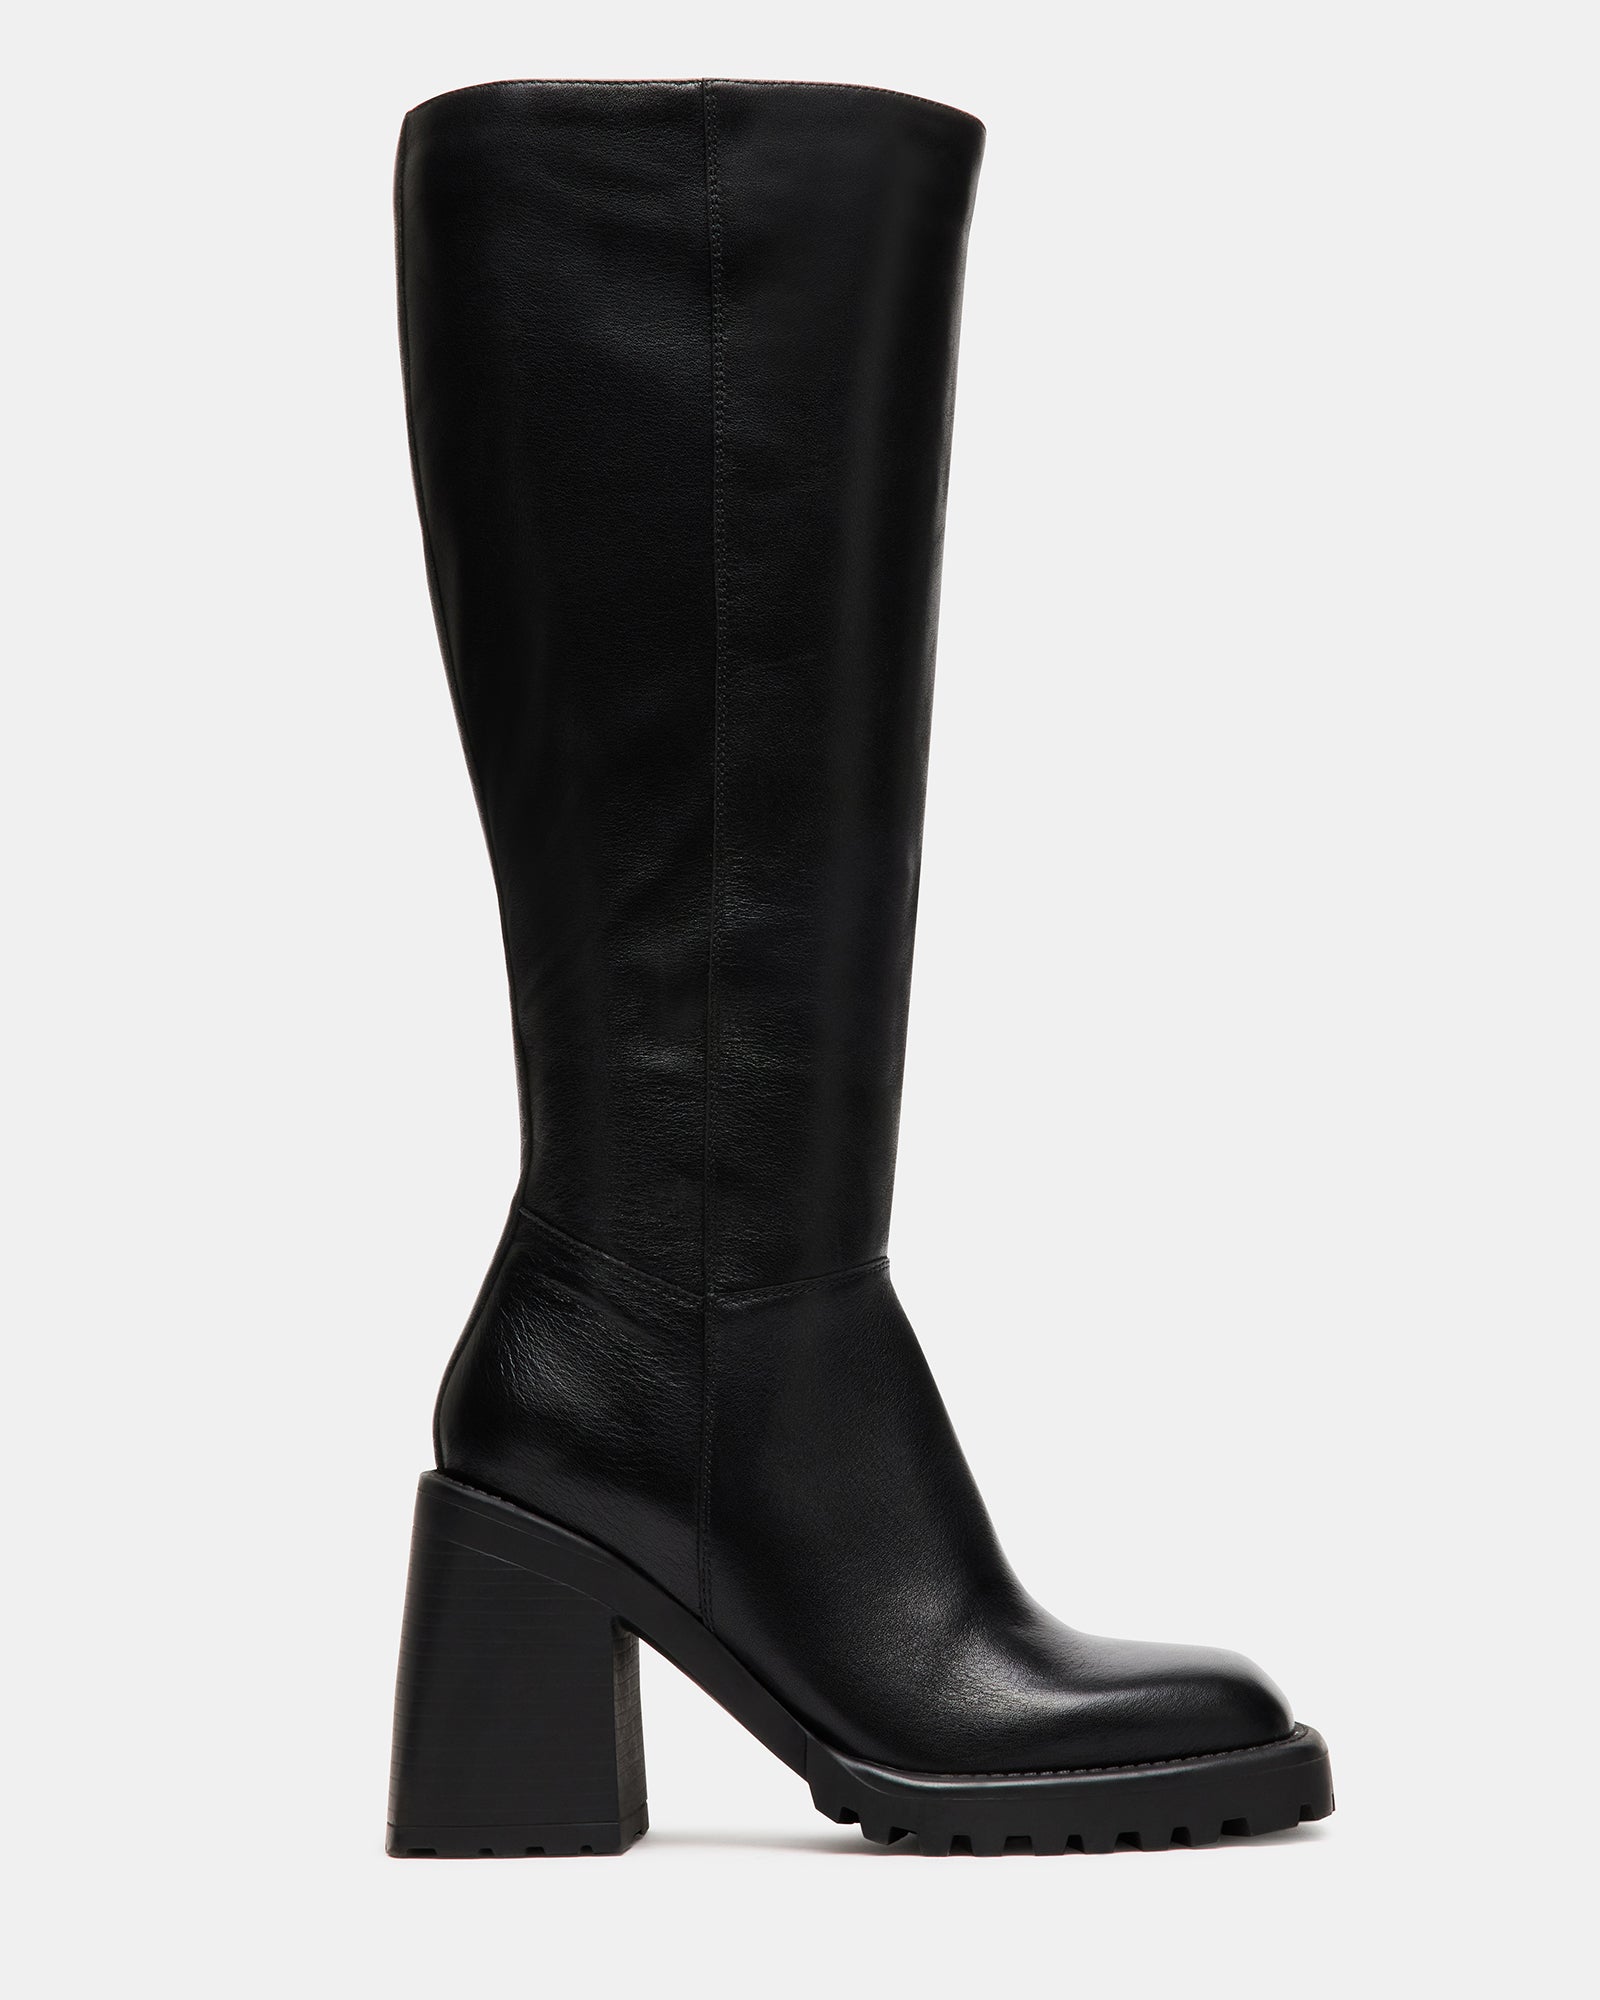 HUTCH Black Ankle Boots for Women | Stacked Block Heel & Lug Sole – Steve  Madden